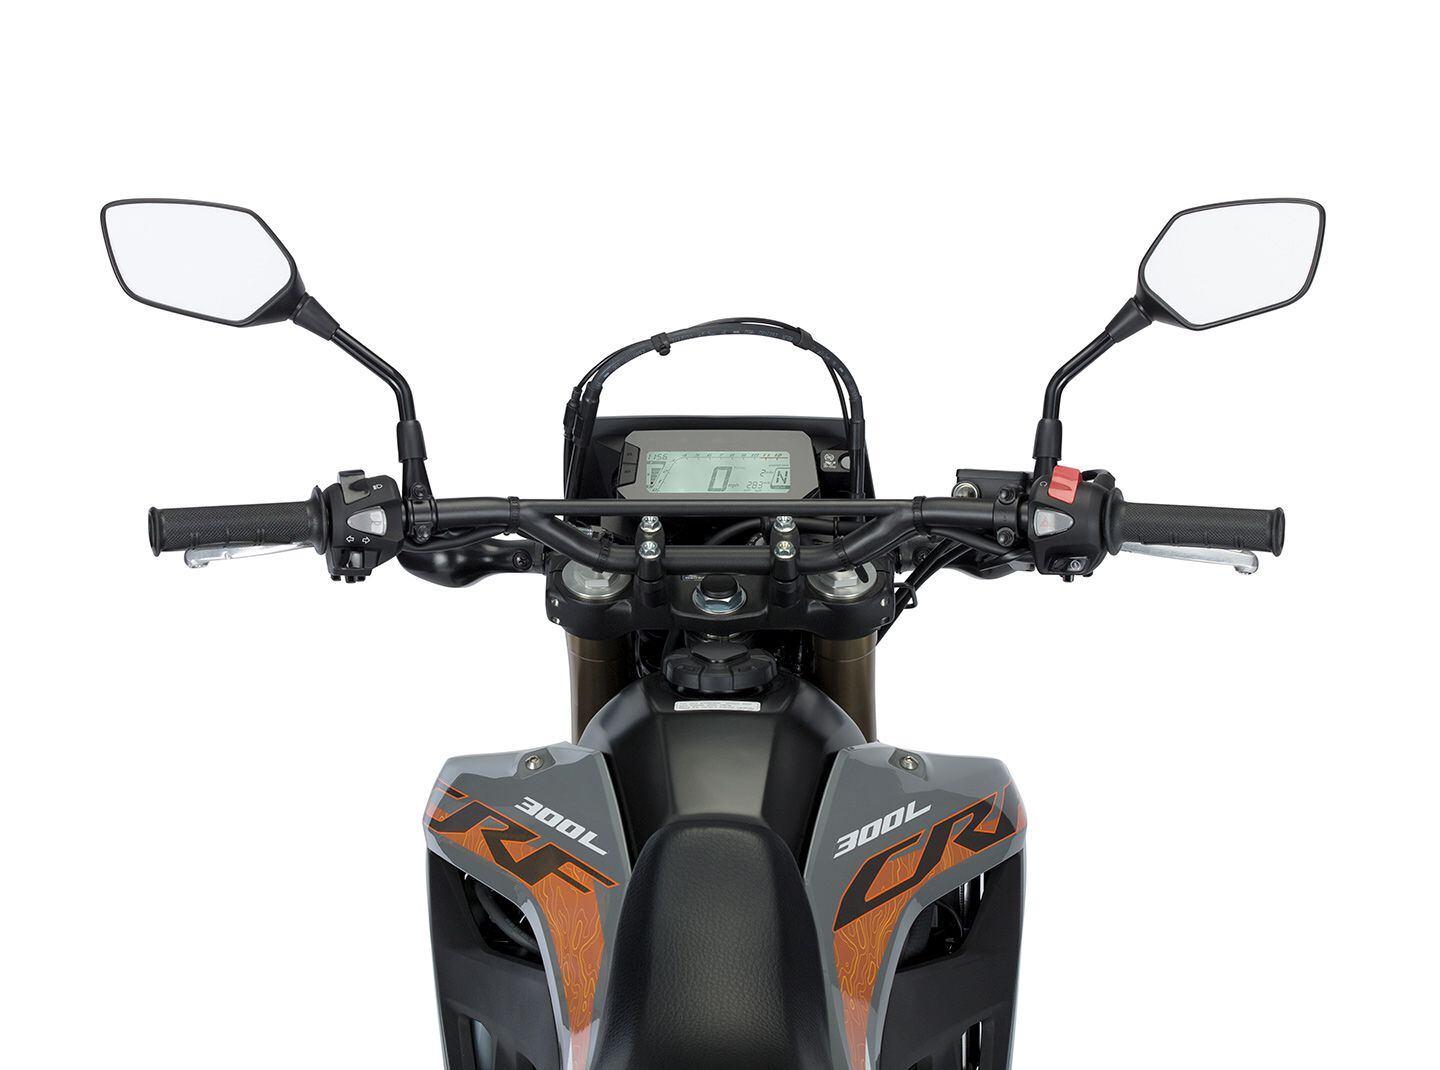 Here’s a view of the CRF300LS’ cockpit. The black-on-white display includes a speedometer, tachometer, clock, gear position indicator, fuel mileage, and fuel indicator.